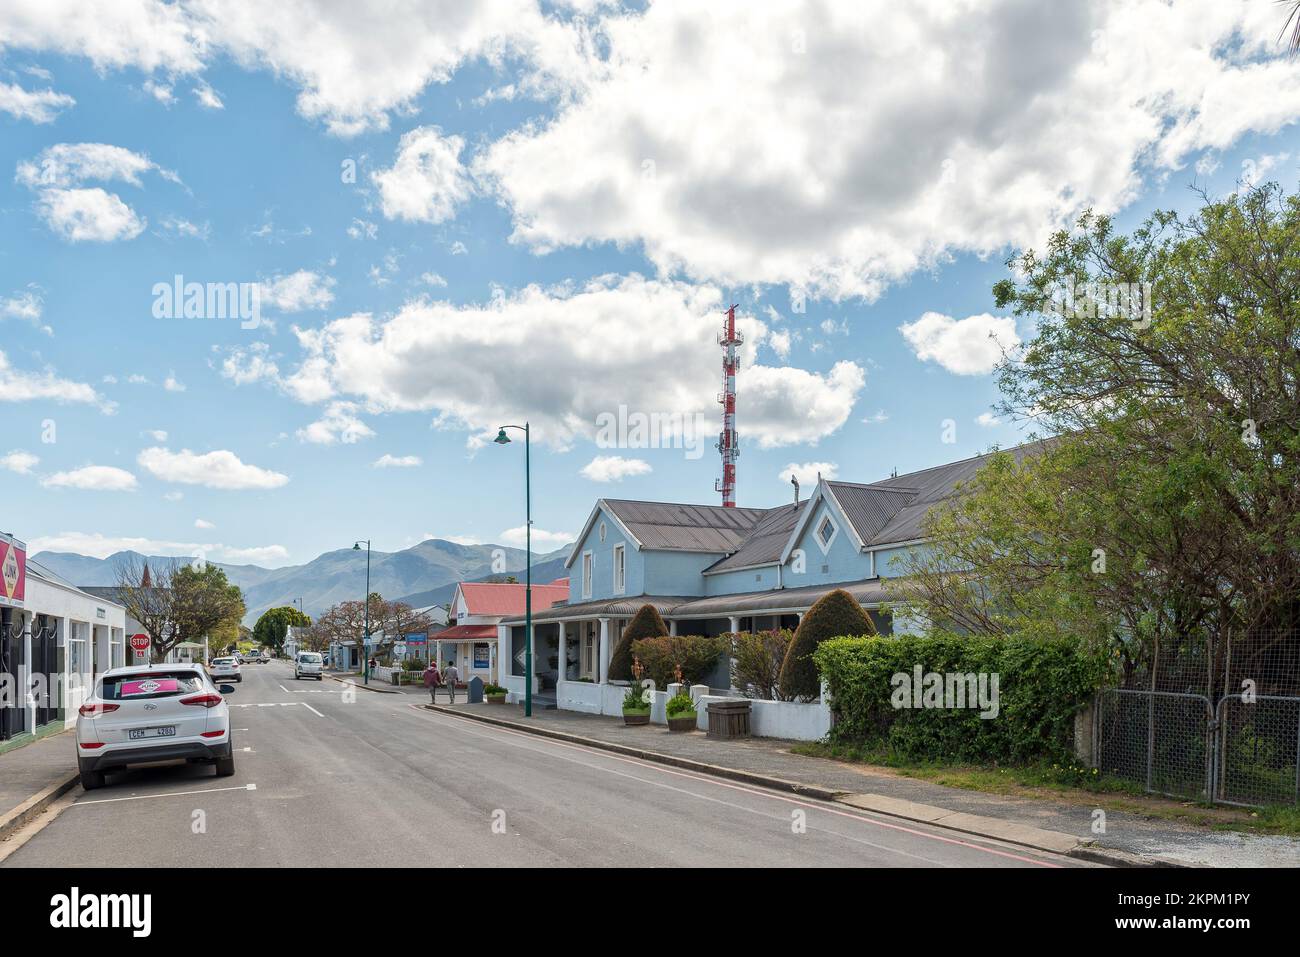 Stanford, South Africa - Sep 20, 2022: A street scene, with houses and businesses, in Stanford in the Western Cape Province Stock Photo